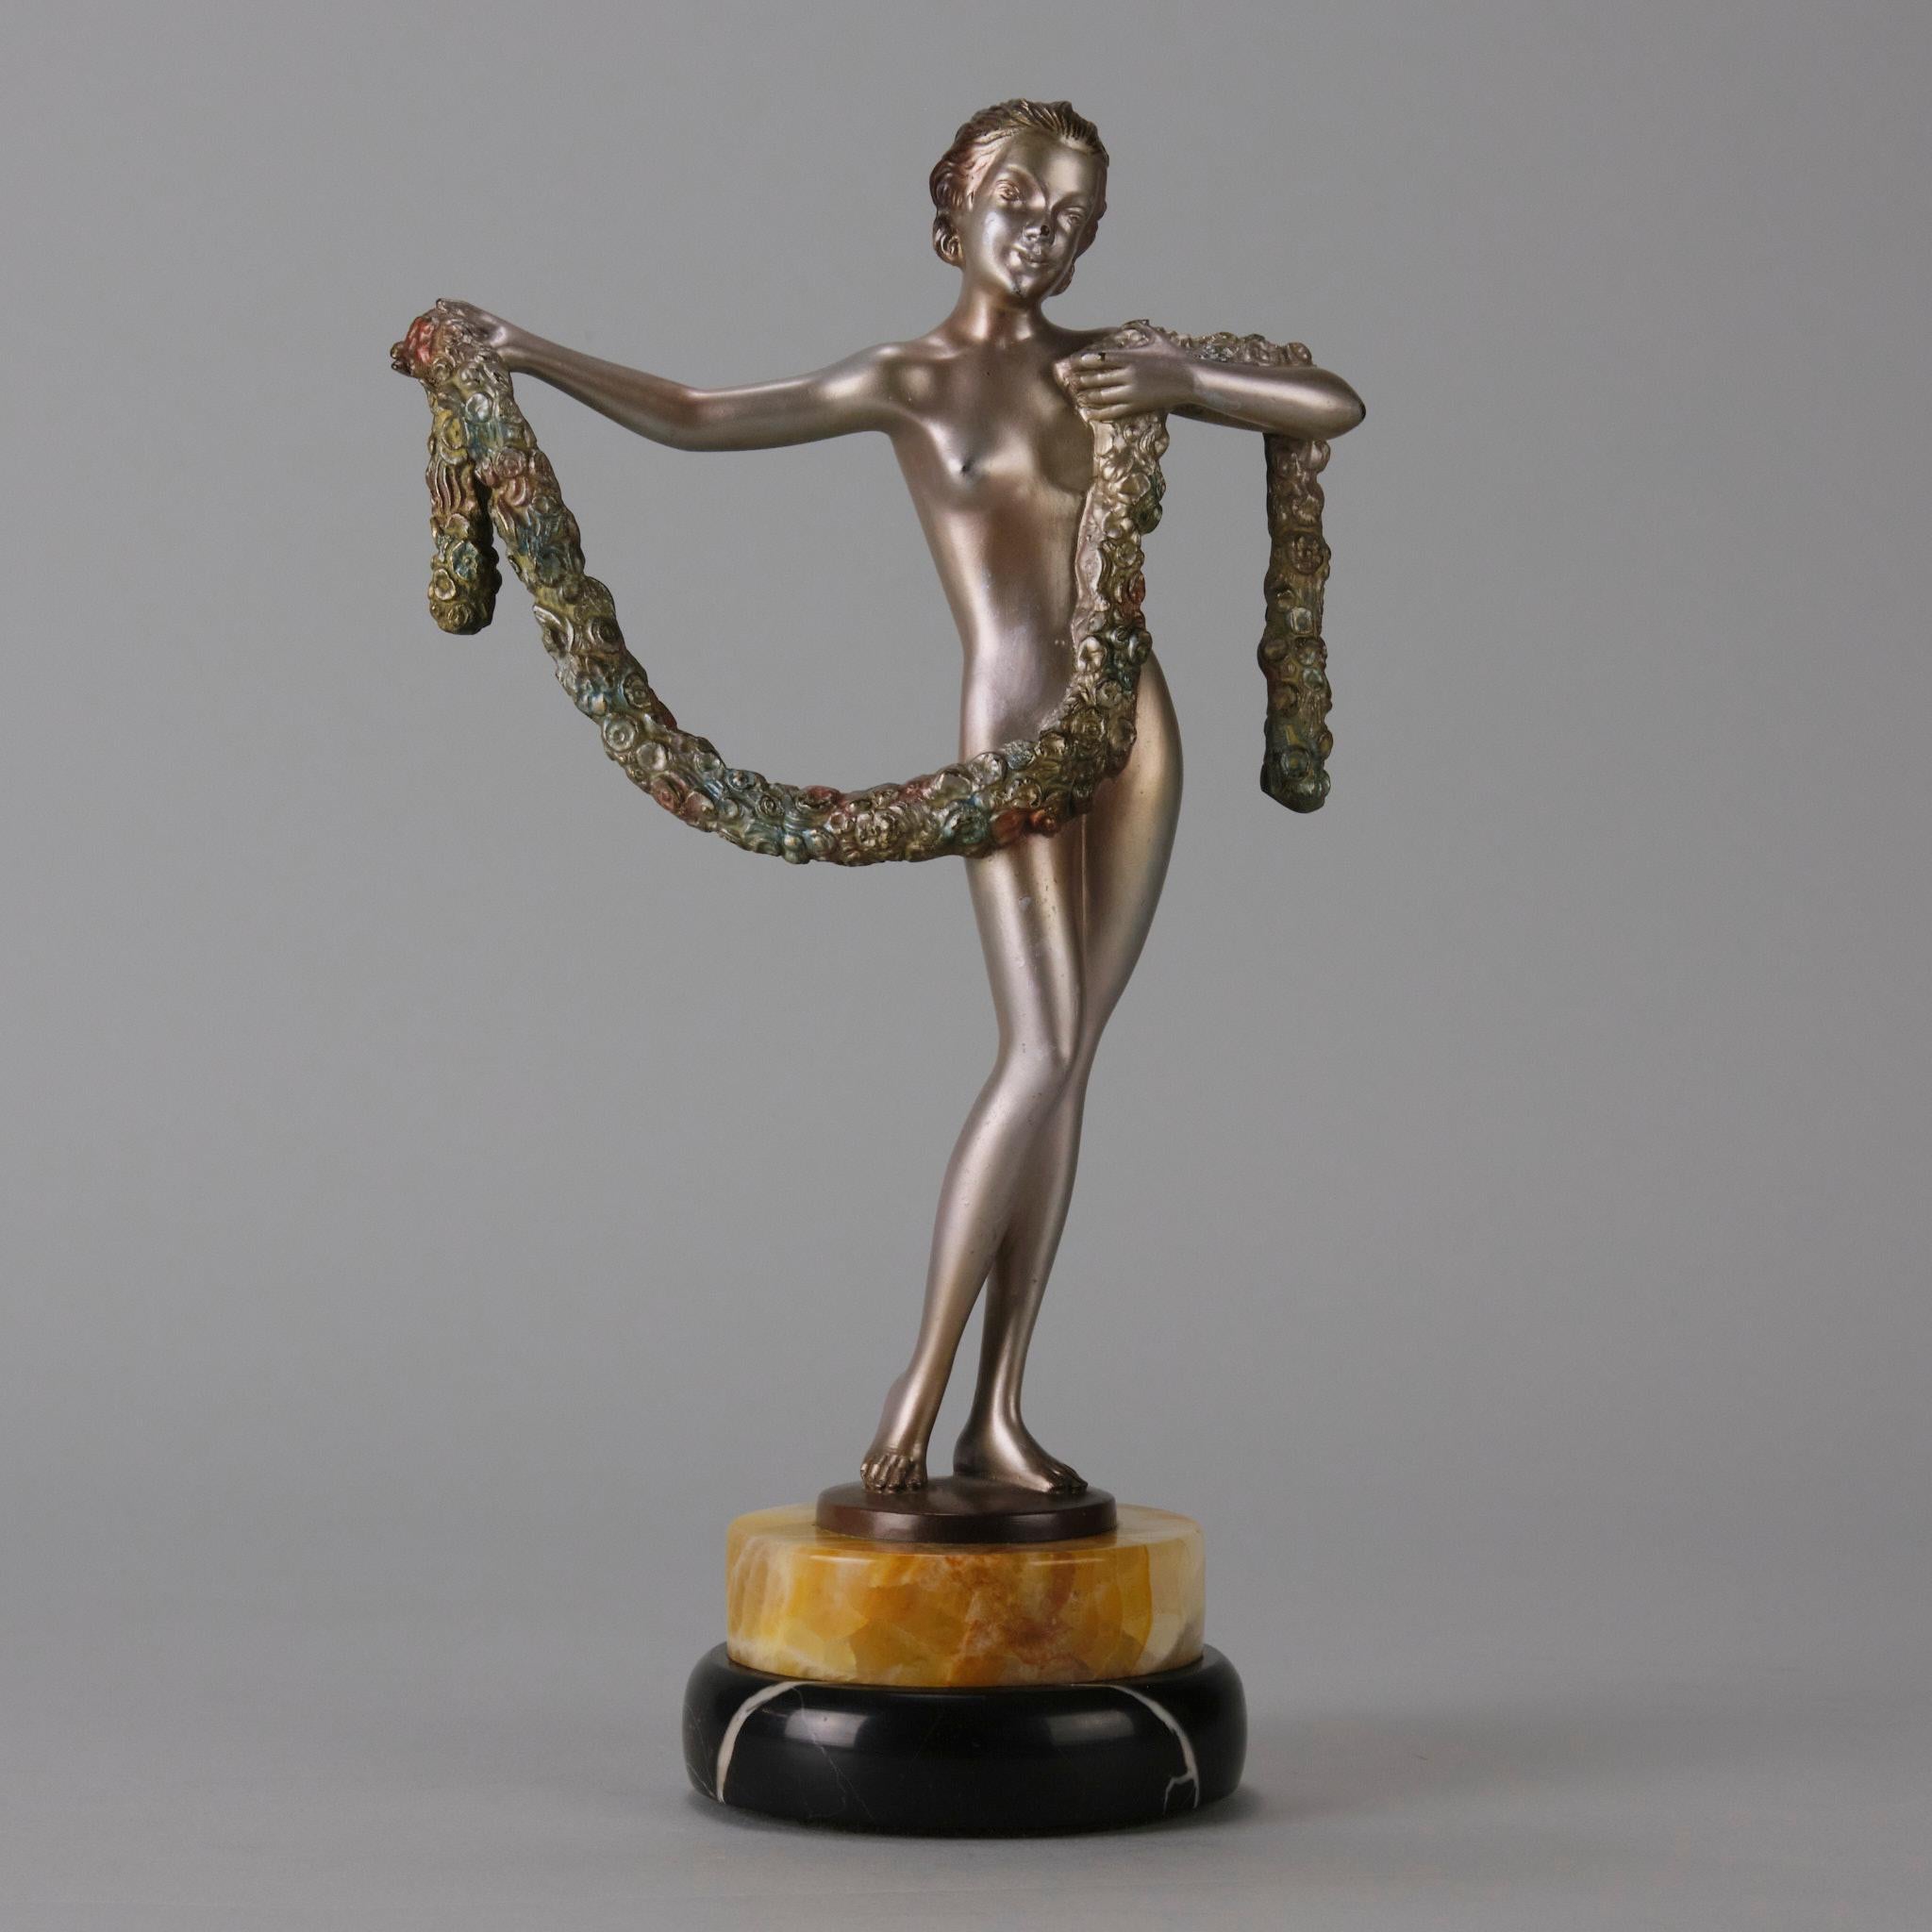 A fabulous early 20th Century Art Deco cold painted silver and enamel bronze figure of a dancer holding a garland of flowers in her arms, raised on a circular stepped onyx and marble base and signed to base rim Lorenzl

Additional